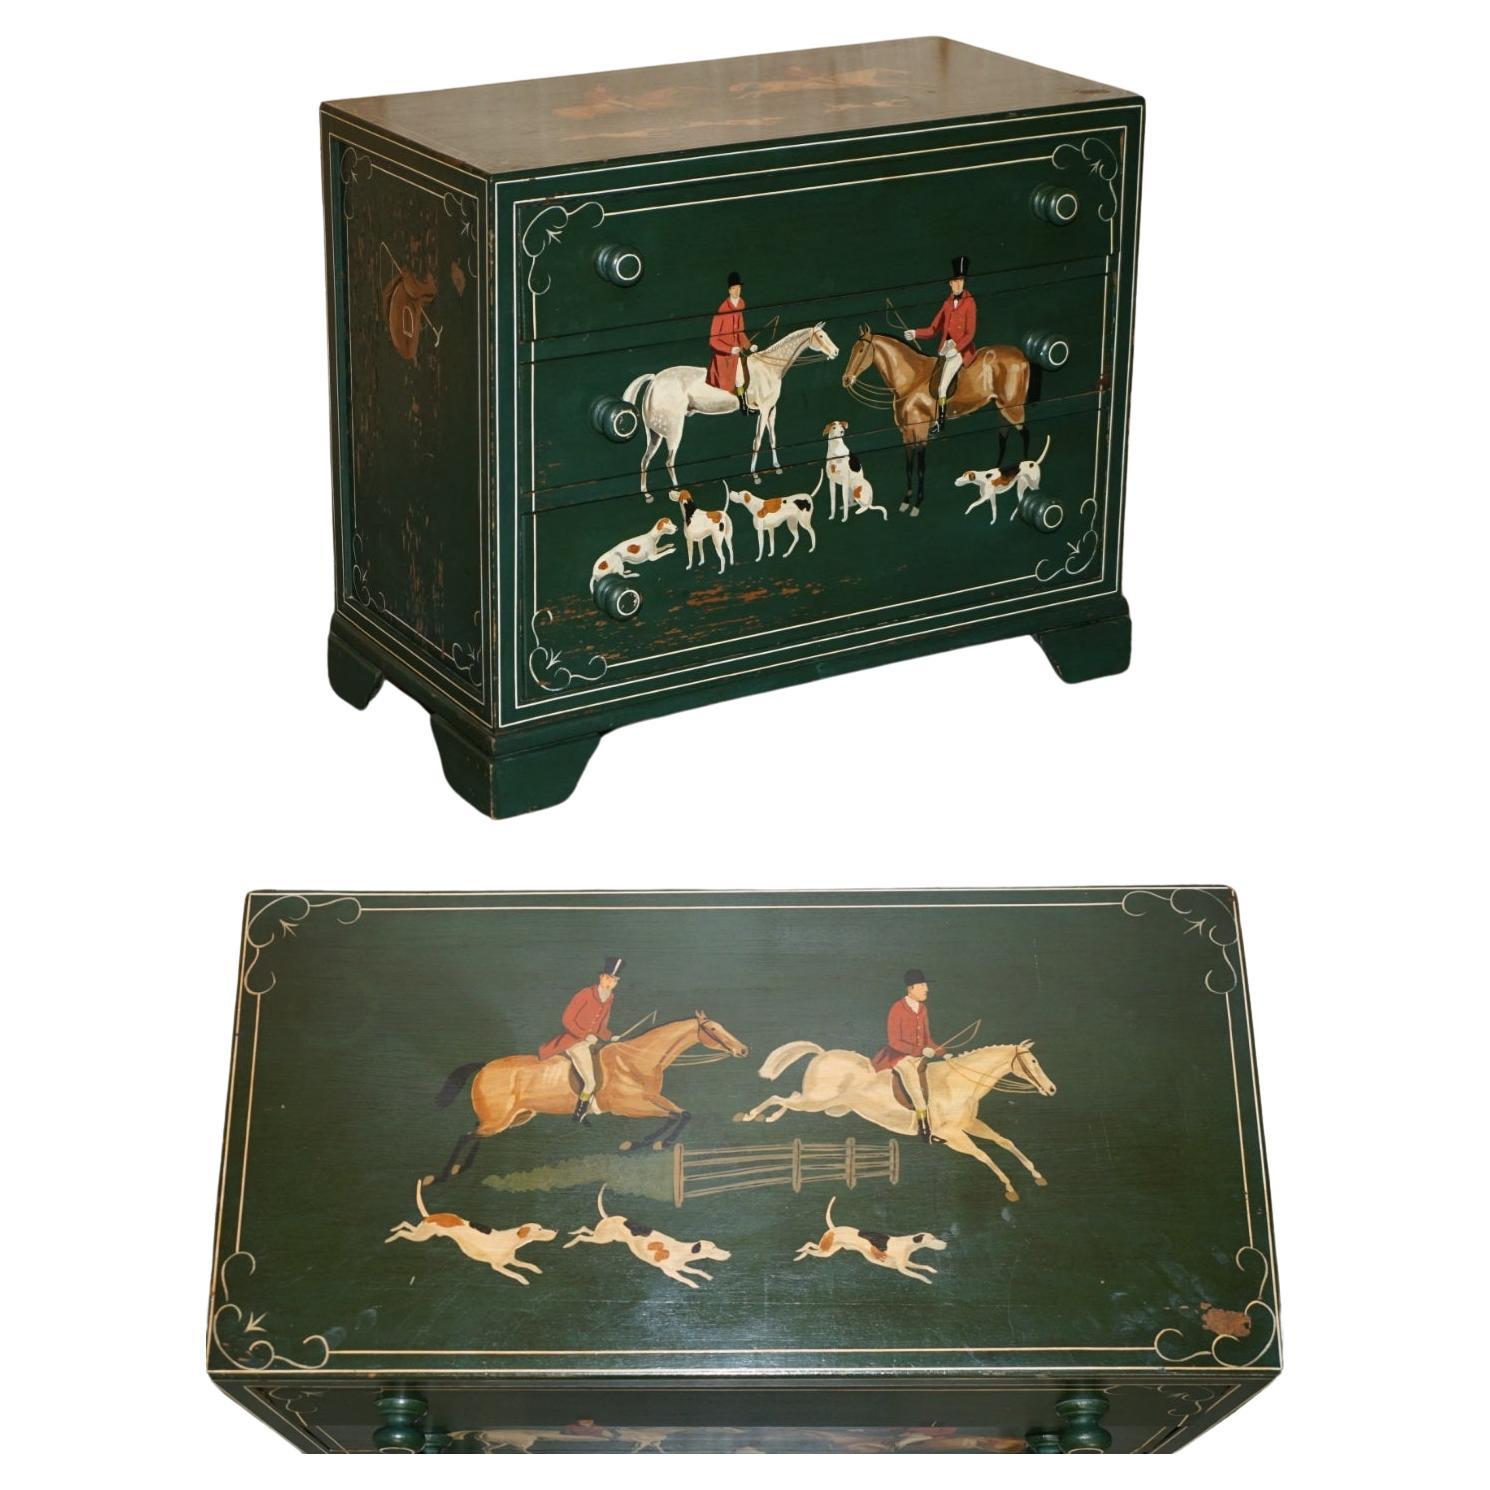 LOVELY ANTiQUE CIRCA 1900 GREEN PAINTED CHEST OF DRAWERS DEPICTING HORSE & RIDER For Sale